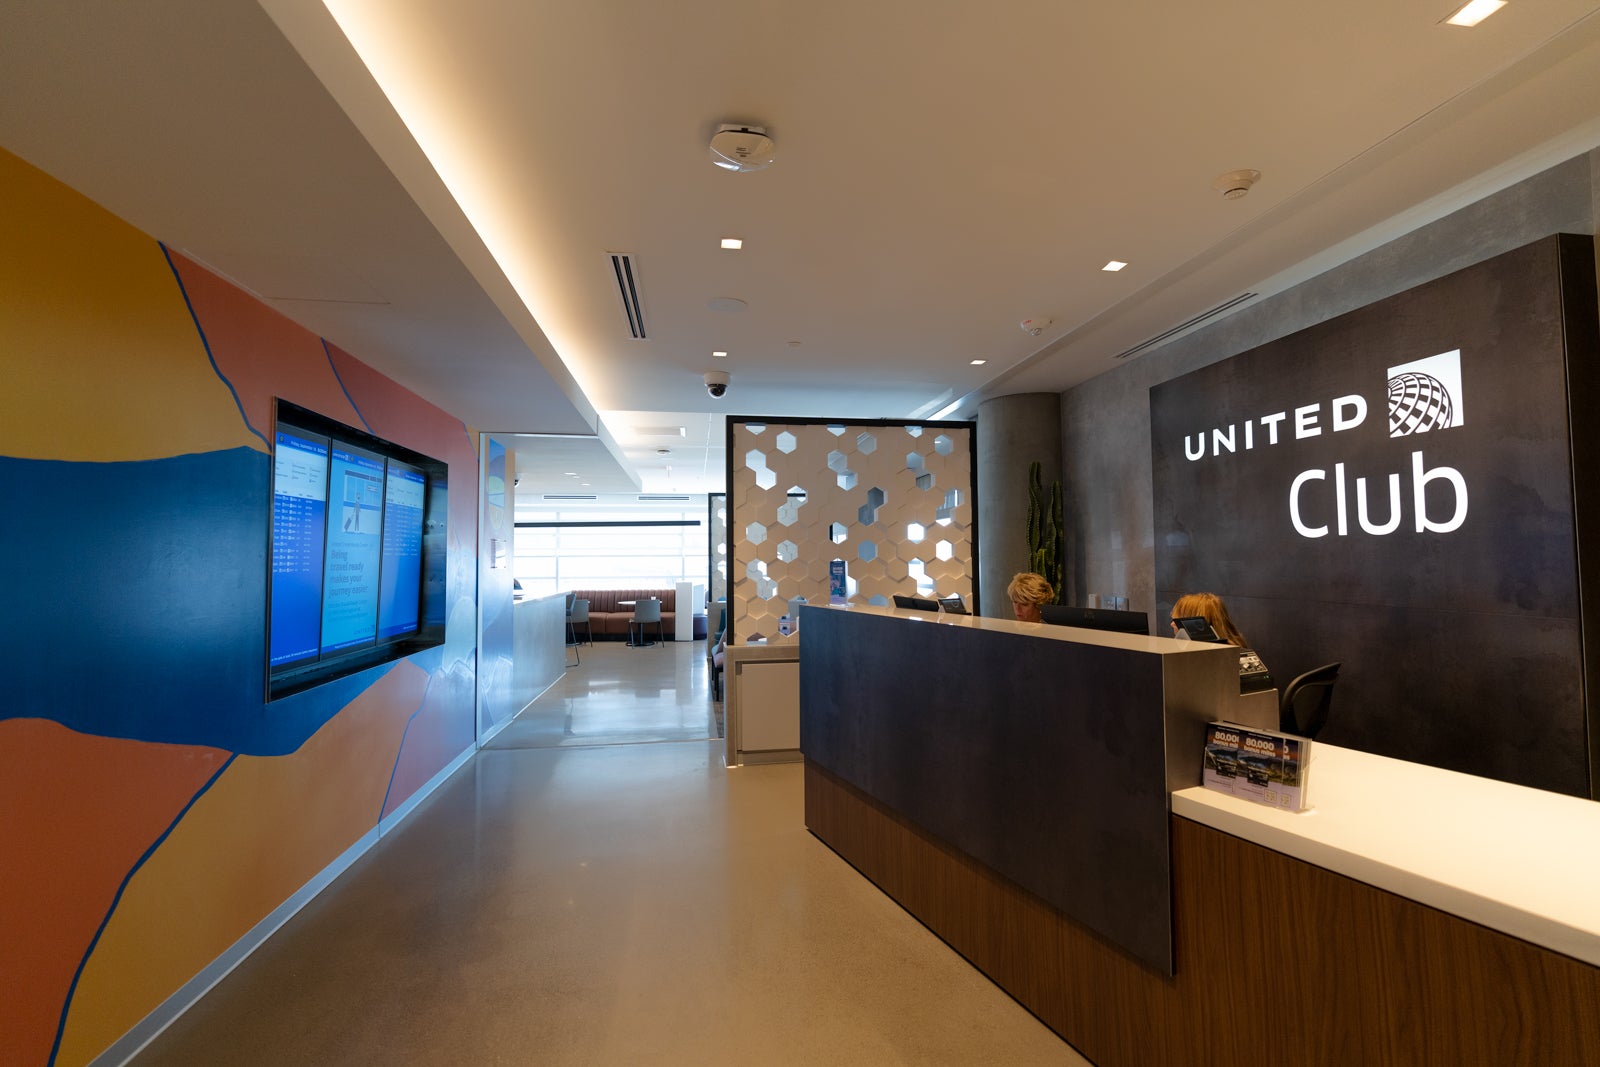 First look: United is opening a brand-new club in Phoenix